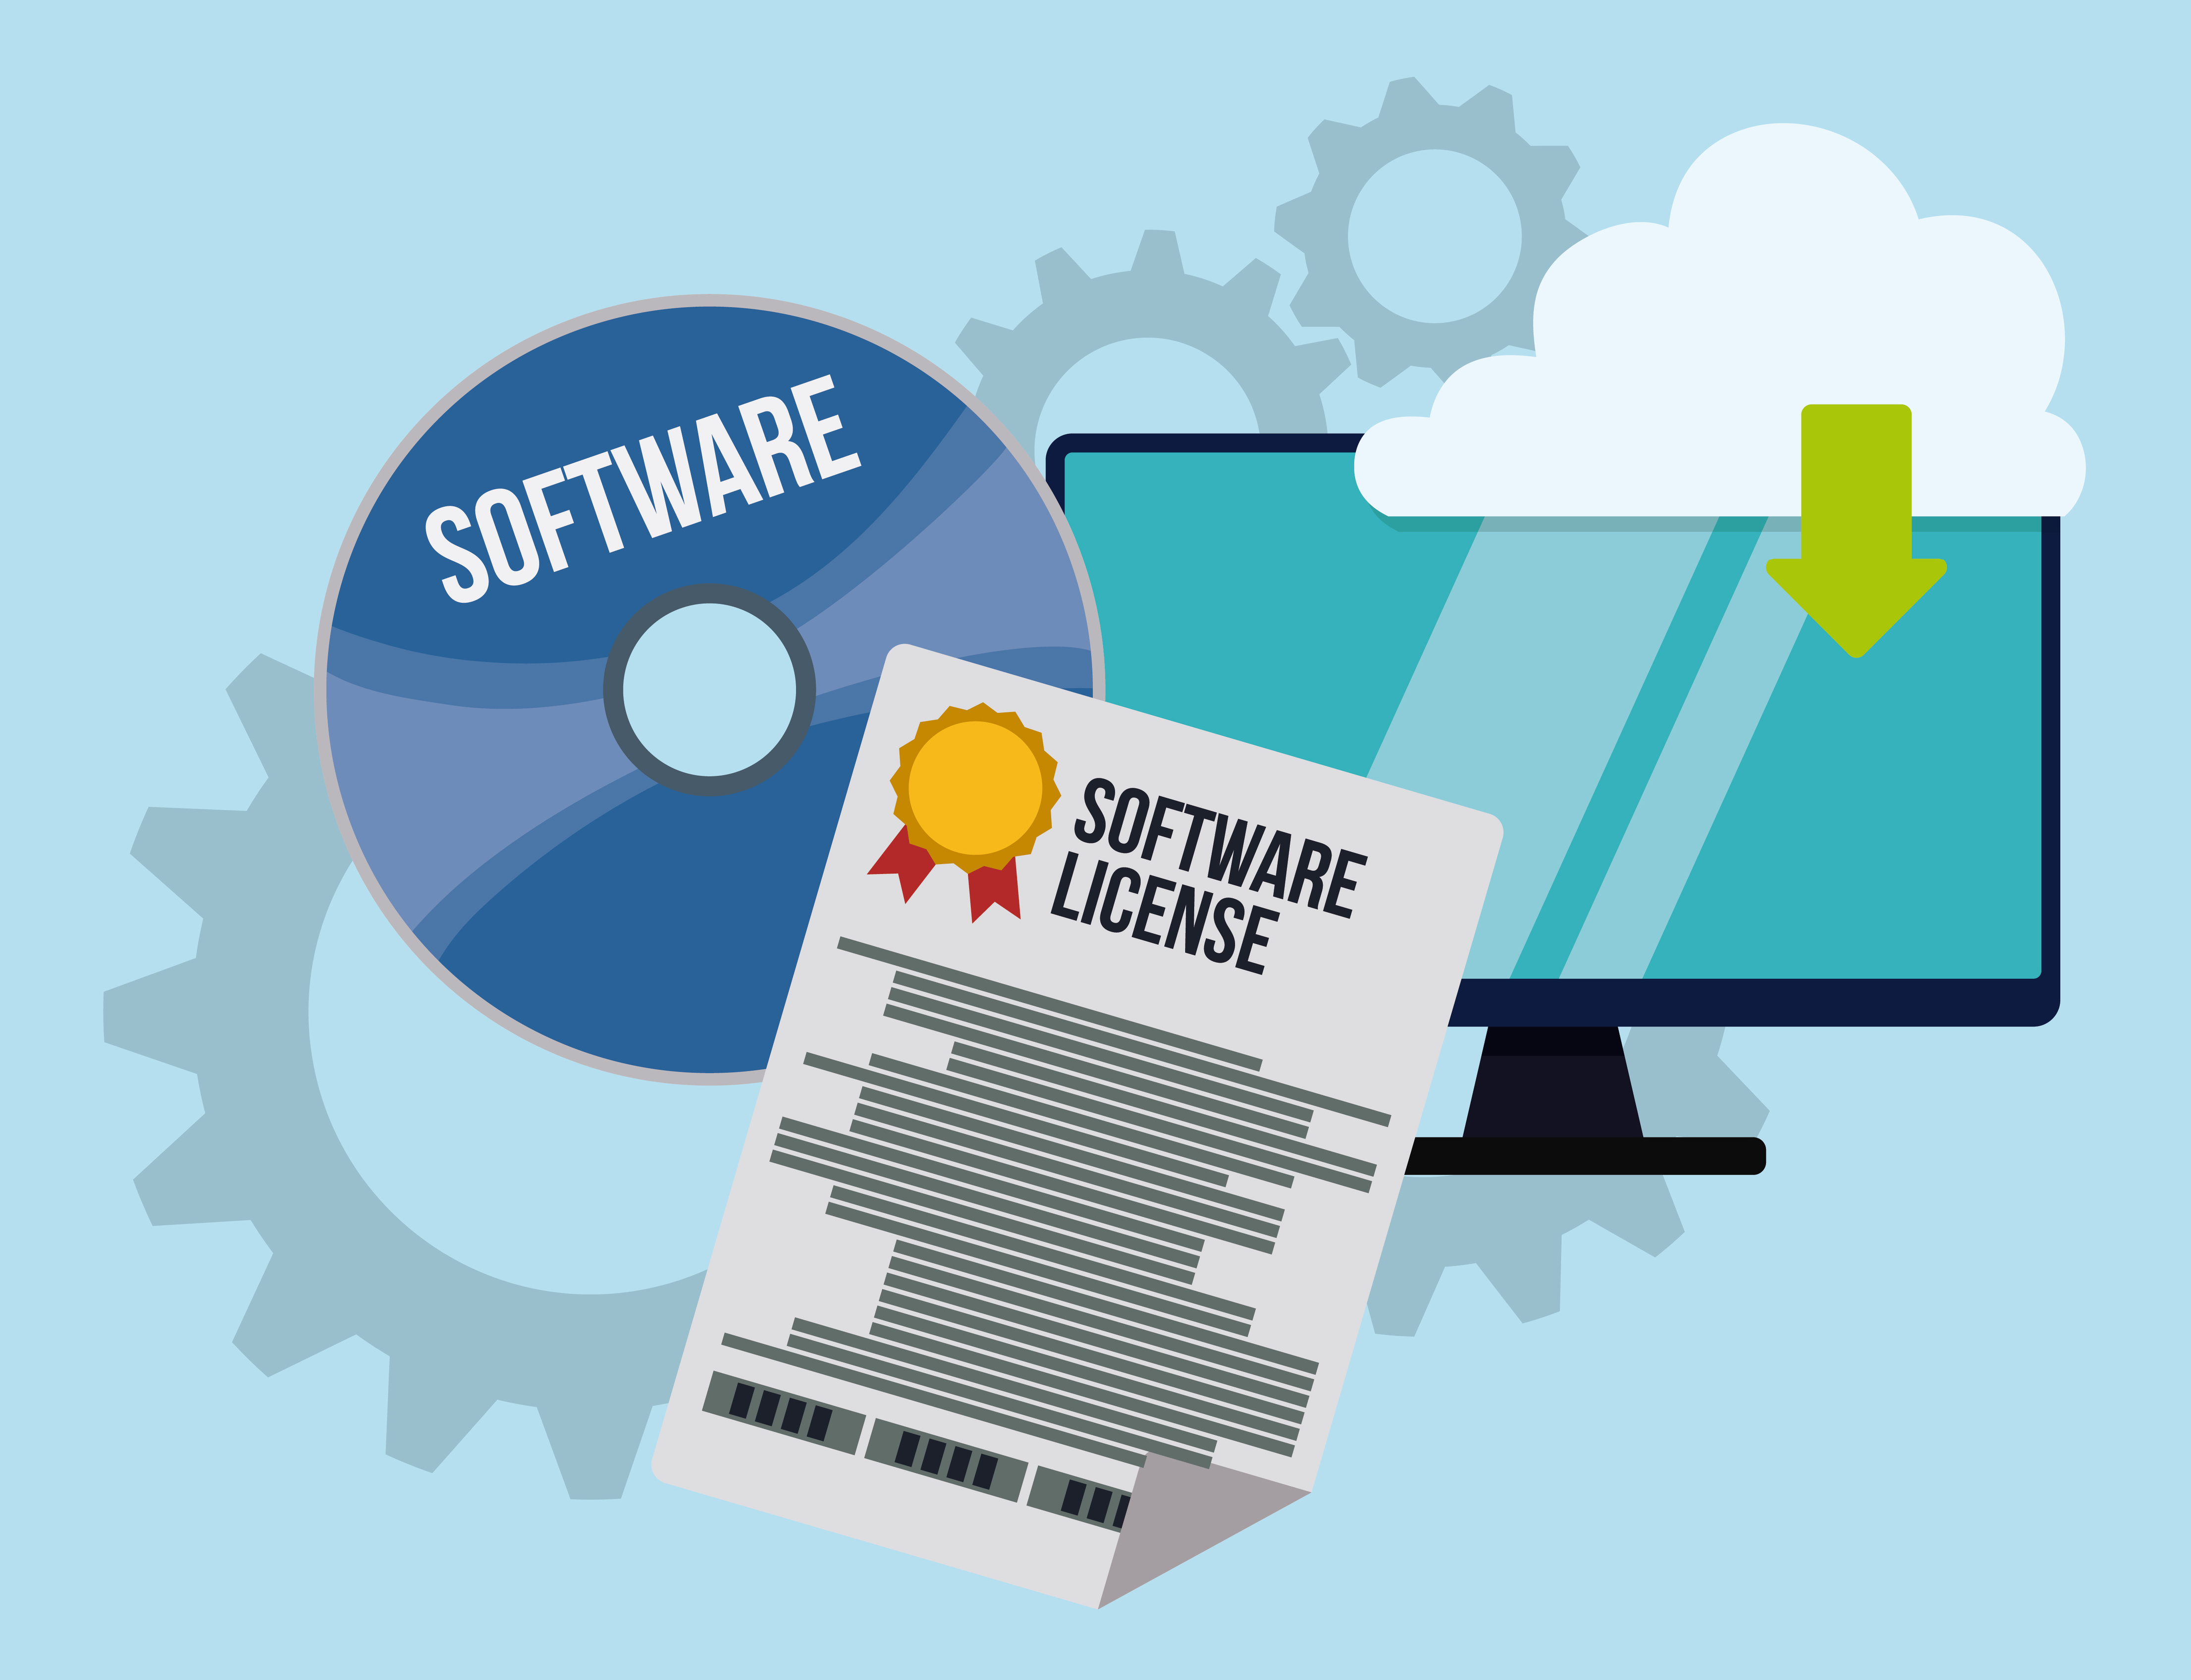 A Basic Guide To Software License Management